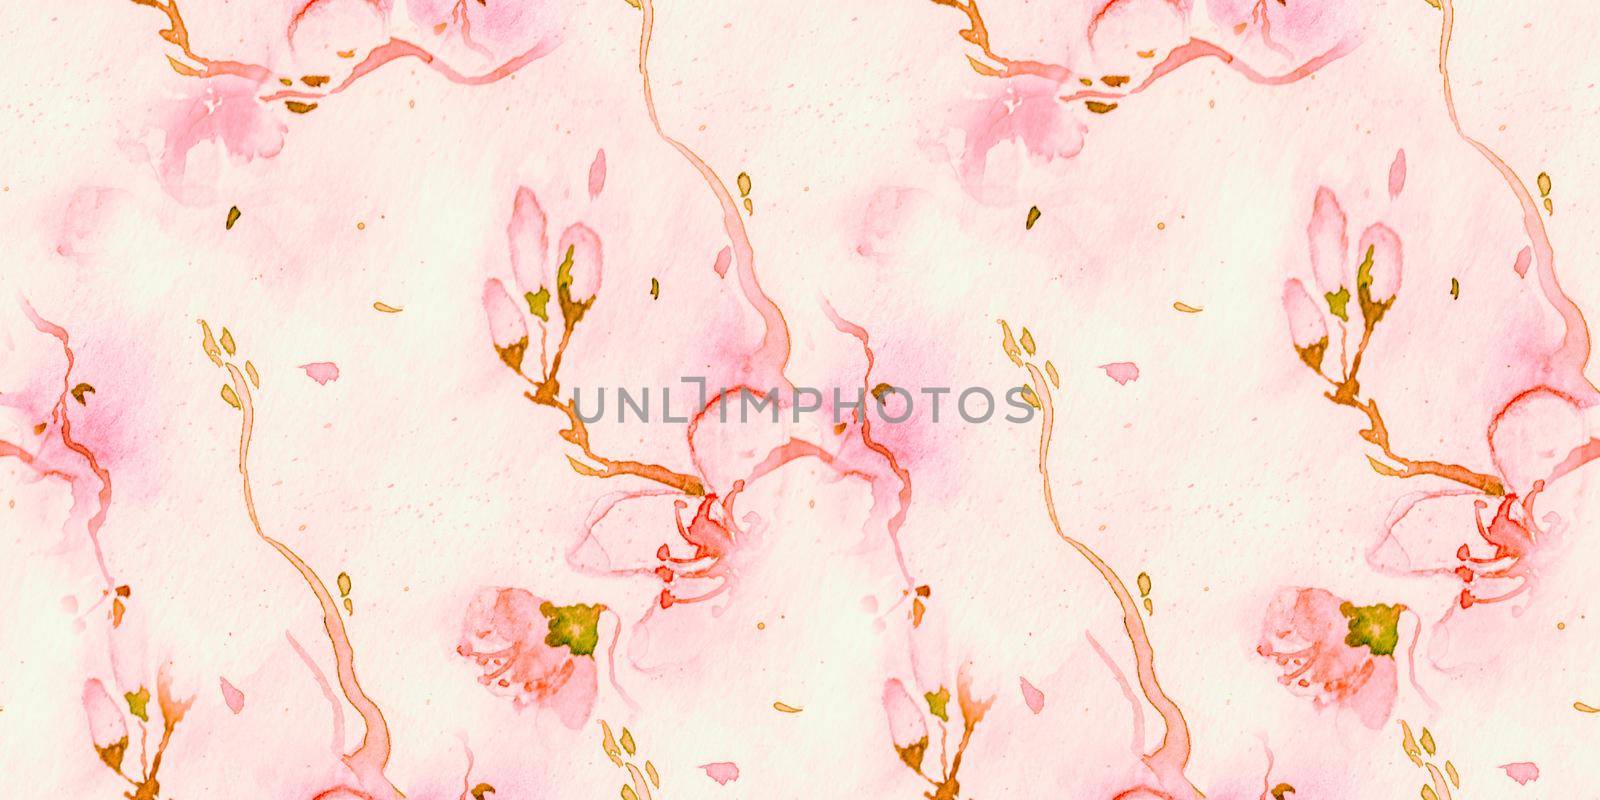 Watercolour Cherry Blossom. Seamless Apple Wallpaper. Chinese Tree Painting. Pastel Modern Soft Drawing. White Cherry Blossom. Vintage Sakura Style. Pink Watercolor Cherry Blossom.